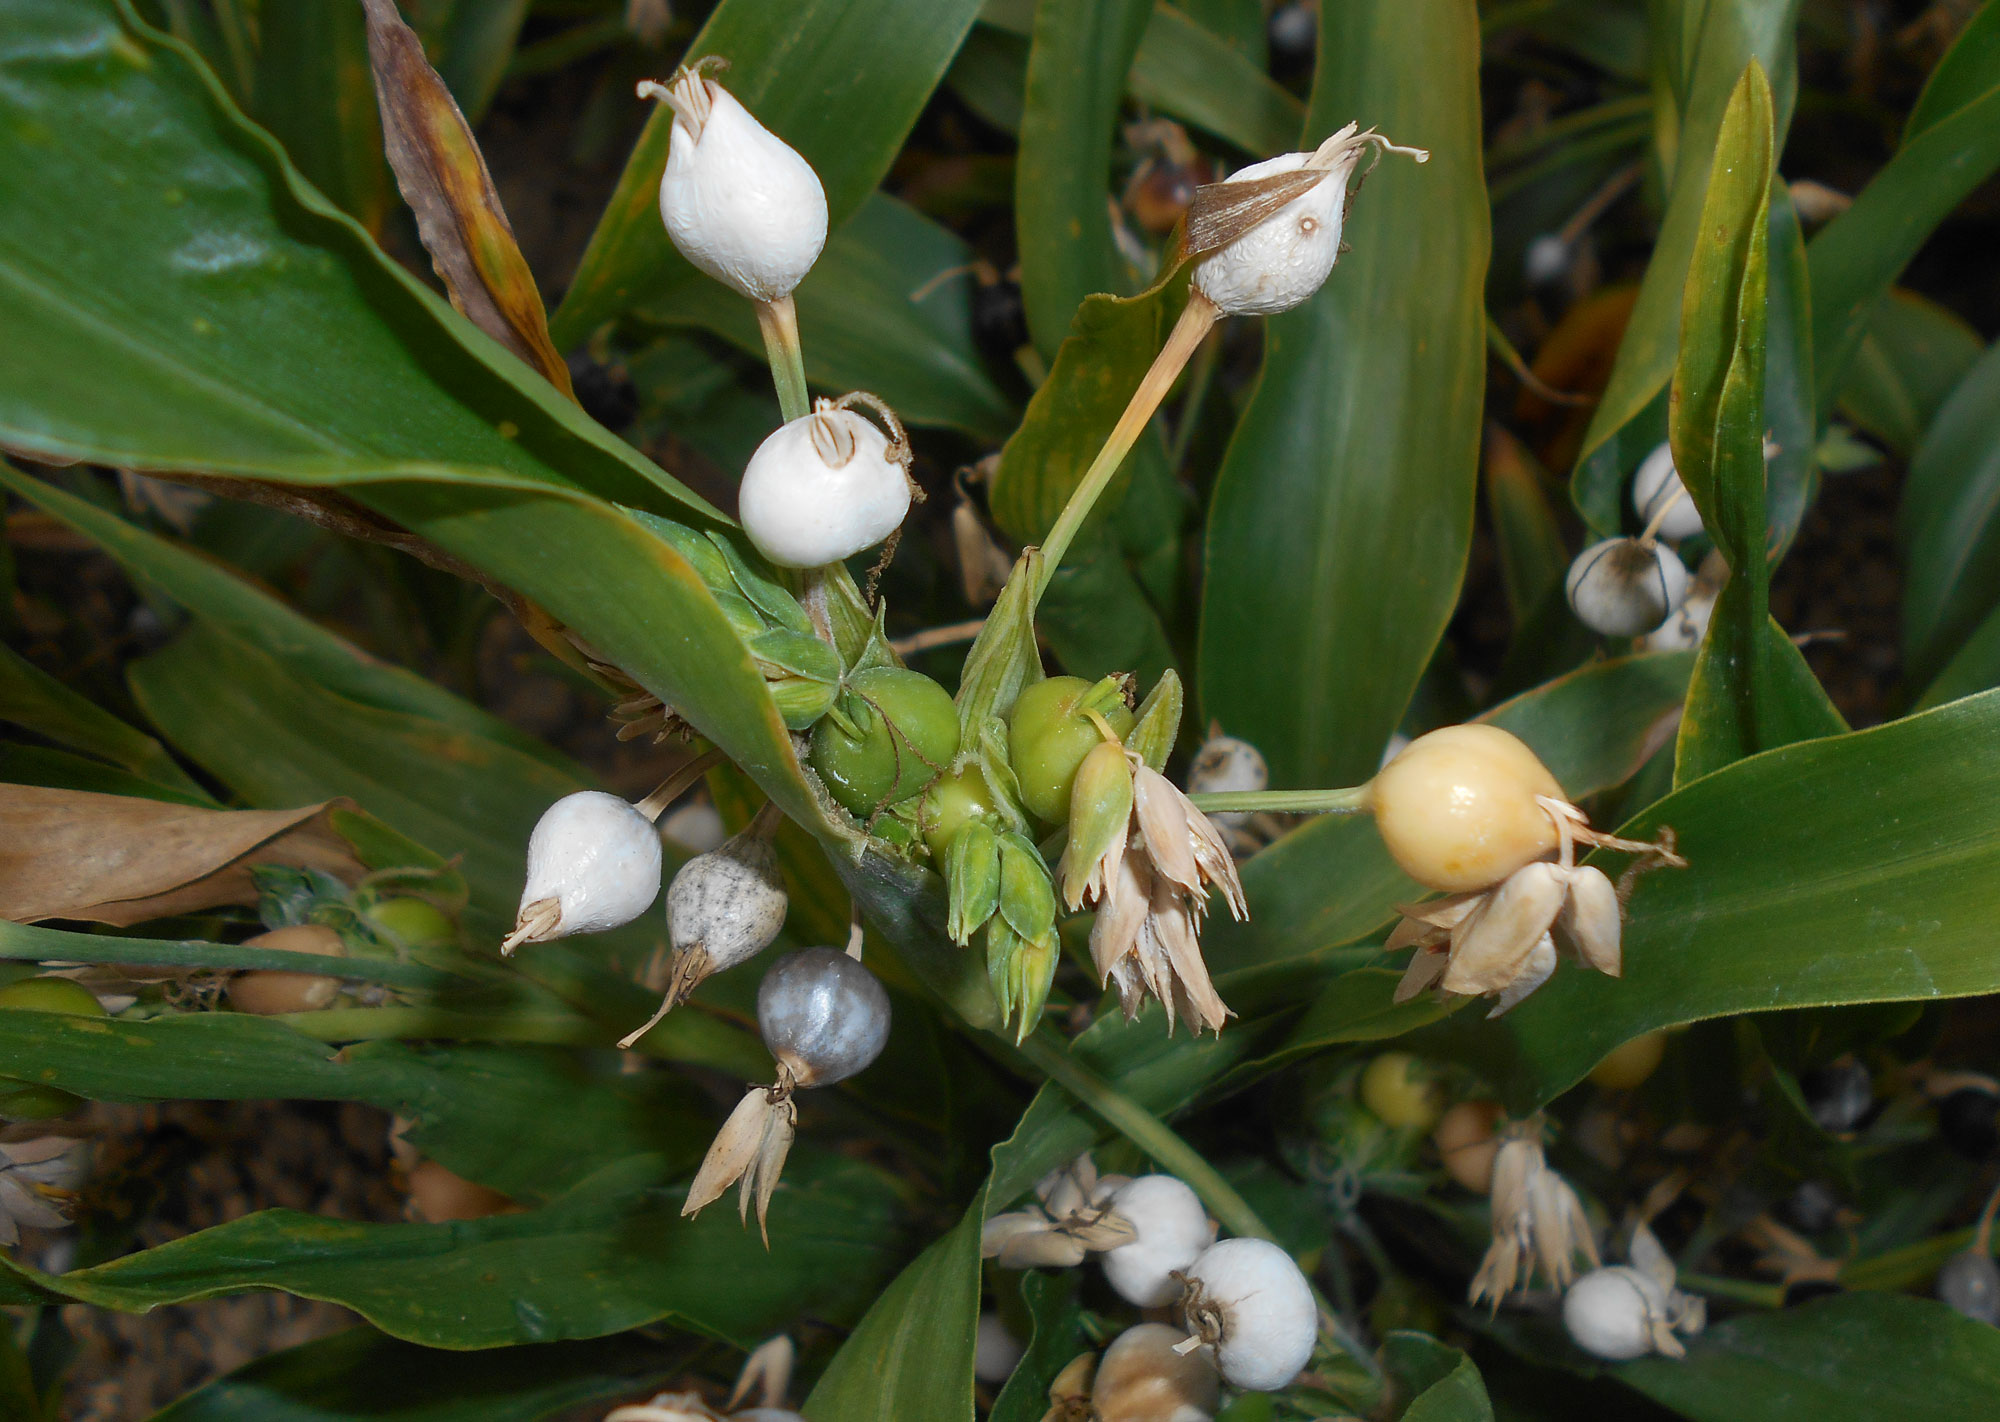 Photograph of cultivated Job's tears. The photo shows a close-up of a group of spikelets. The are large and ovate and vary in color from light gray to dark gray to beige.